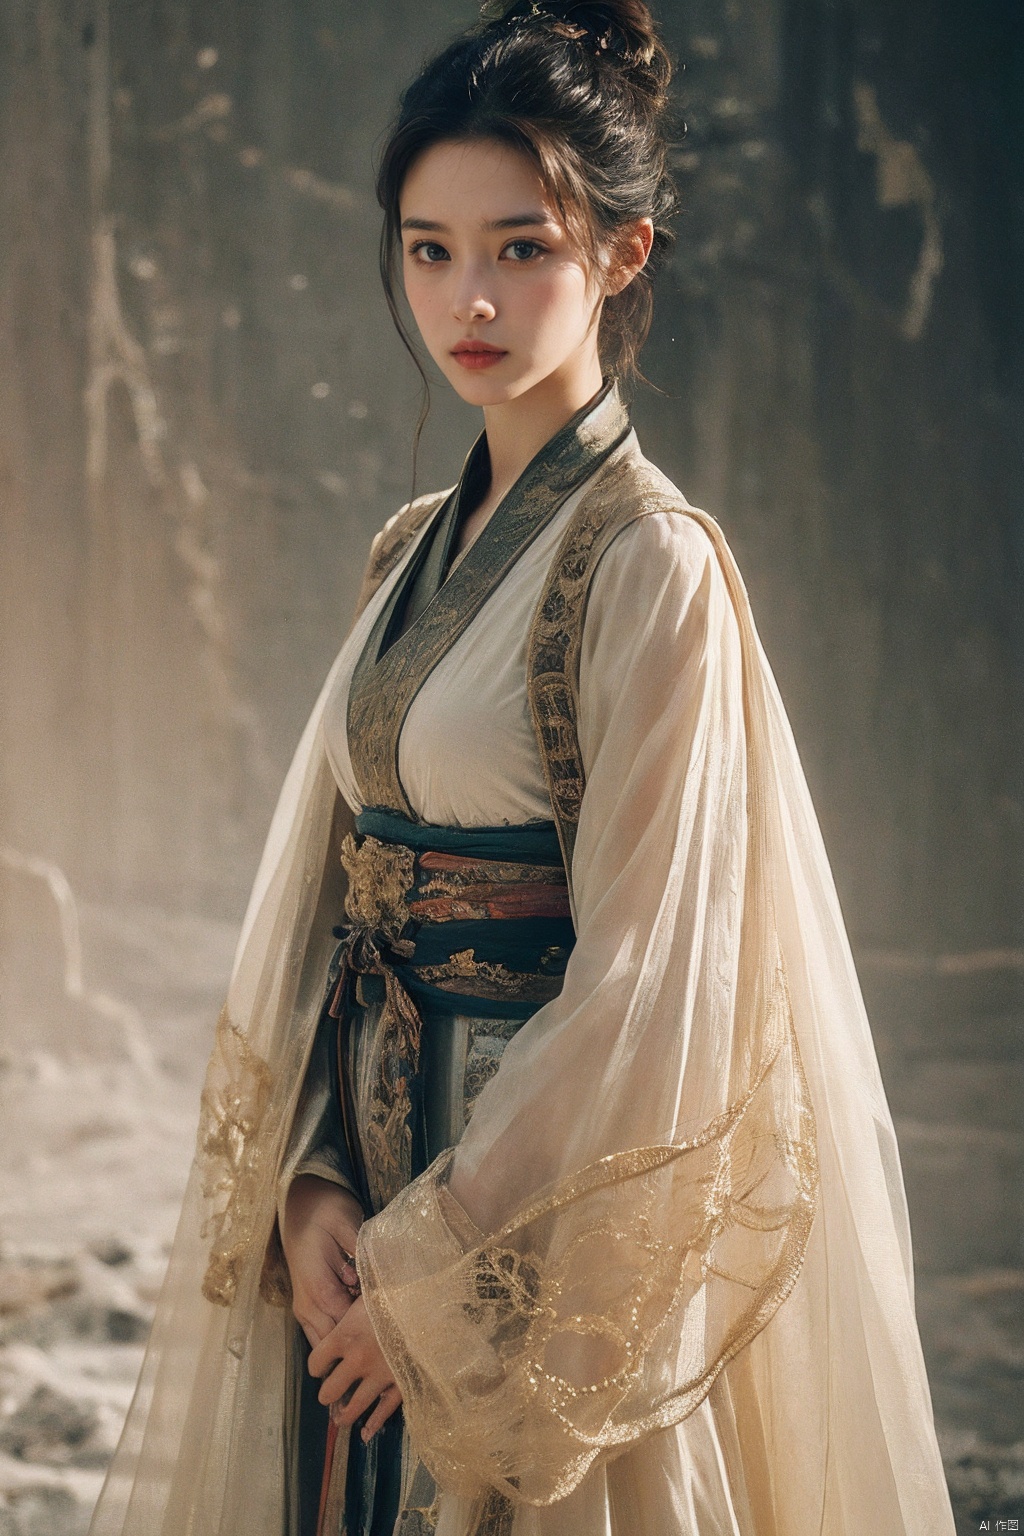 In a visually striking and evocative photograph inspired by the portraiture style of Annie Leibovitz, we find a young woman dressed in an elegant traditional Hanfu gown standing against a stark, solid-colored background. The subject is portrayed with poise and grace, her every movement captured in a timeless moment.

The intricately embroidered layers of silk in her dress ripple and flow around her form, showcasing the rich cultural heritage embedded within the fabric. Her hair is styled in an elaborate updo adorned with delicate ornaments that accentuate the fine lines and contours of her face. Her eyes are filled with a quiet confidence, hinting at both pride in her heritage and a contemporary connection to the ancient tradition.

Render this scene with (8K resolution, best quality: 1.4), (hyper-realistic textile rendering: 1.6), (meticulous attention to detail in costume design: 1.8), (subtle chiaroscuro lighting to sculpt her features: 2.0), (bold, high-contrast color palette for the background to emphasize the figure: 1.5), (precise focus on the interplay between light and shadow on the garment's texture: 1.7), (expression capturing the essence of cultural fusion and timelessness: 1.9), (cinematic composition that balances simplicity with depth: 1.3)., ((poakl))